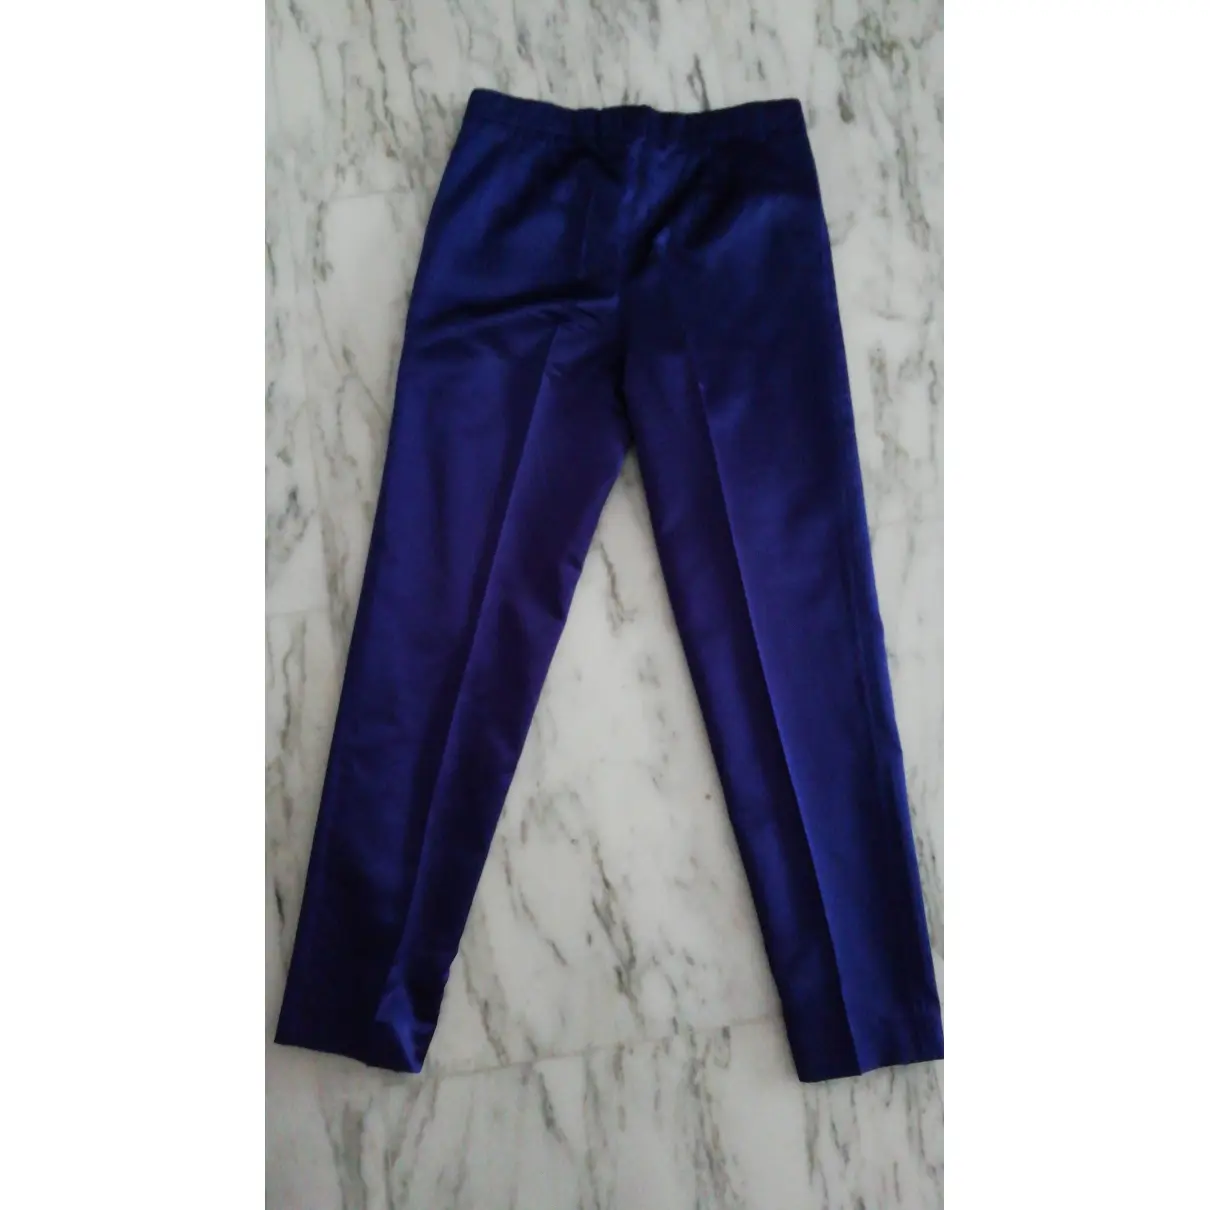 Buy Gucci Silk trousers online - Vintage